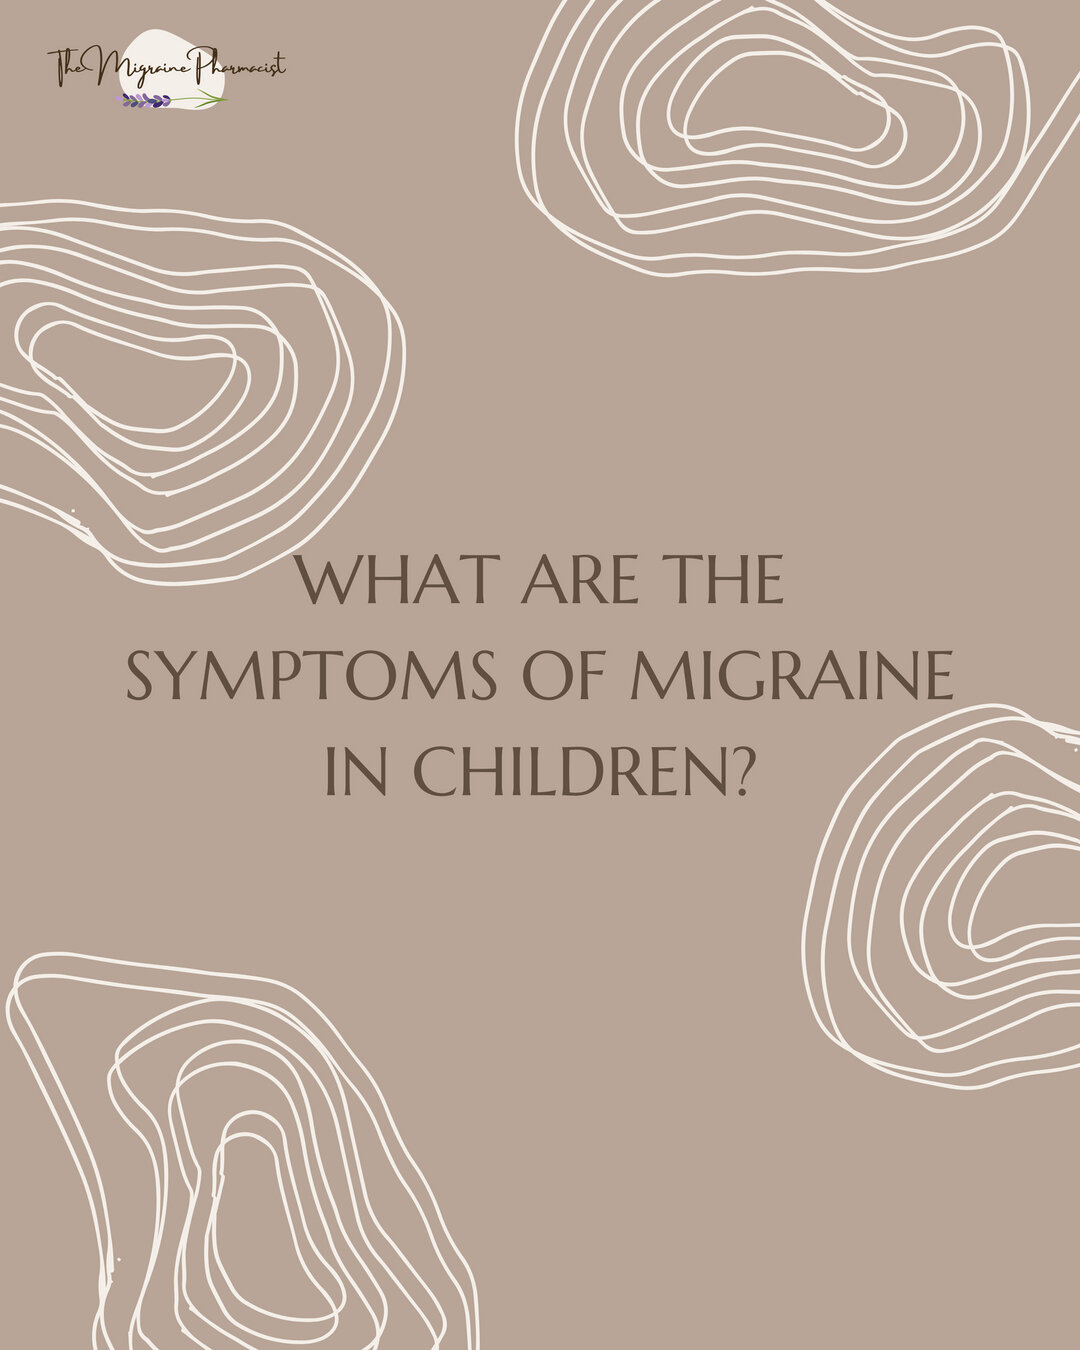 Migraine Symptoms in children are not very different from those in adults. Headache can be on one side or two sides of the head, sensitivity to light &amp;/or sound, and needing to lie down are the most common symptoms. Nausea and vomiting are the mo